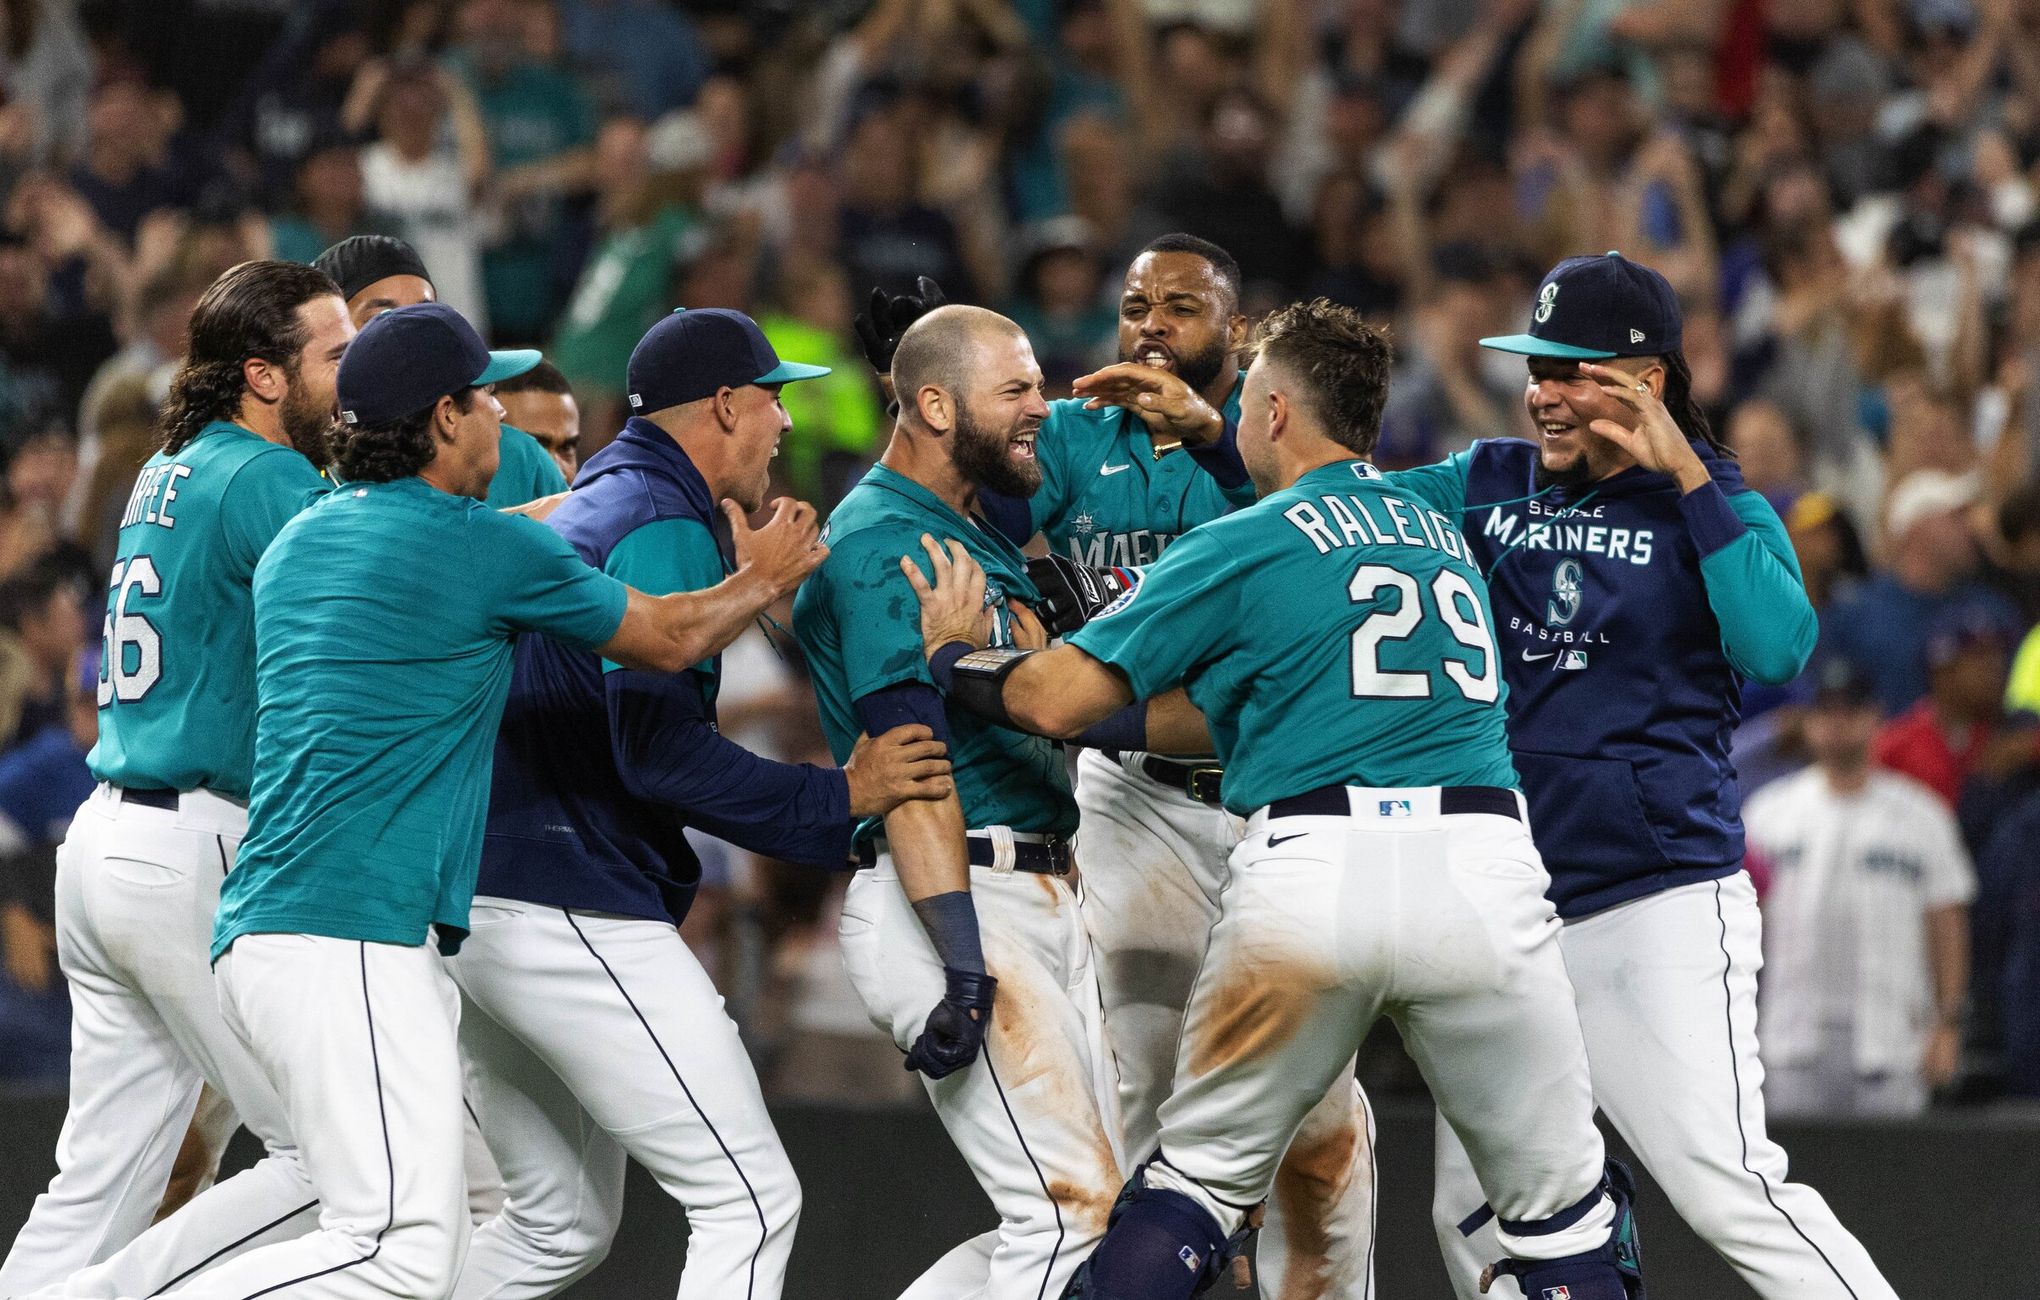 Many 2001 Mariners see a lot of playoff potential for this year's team